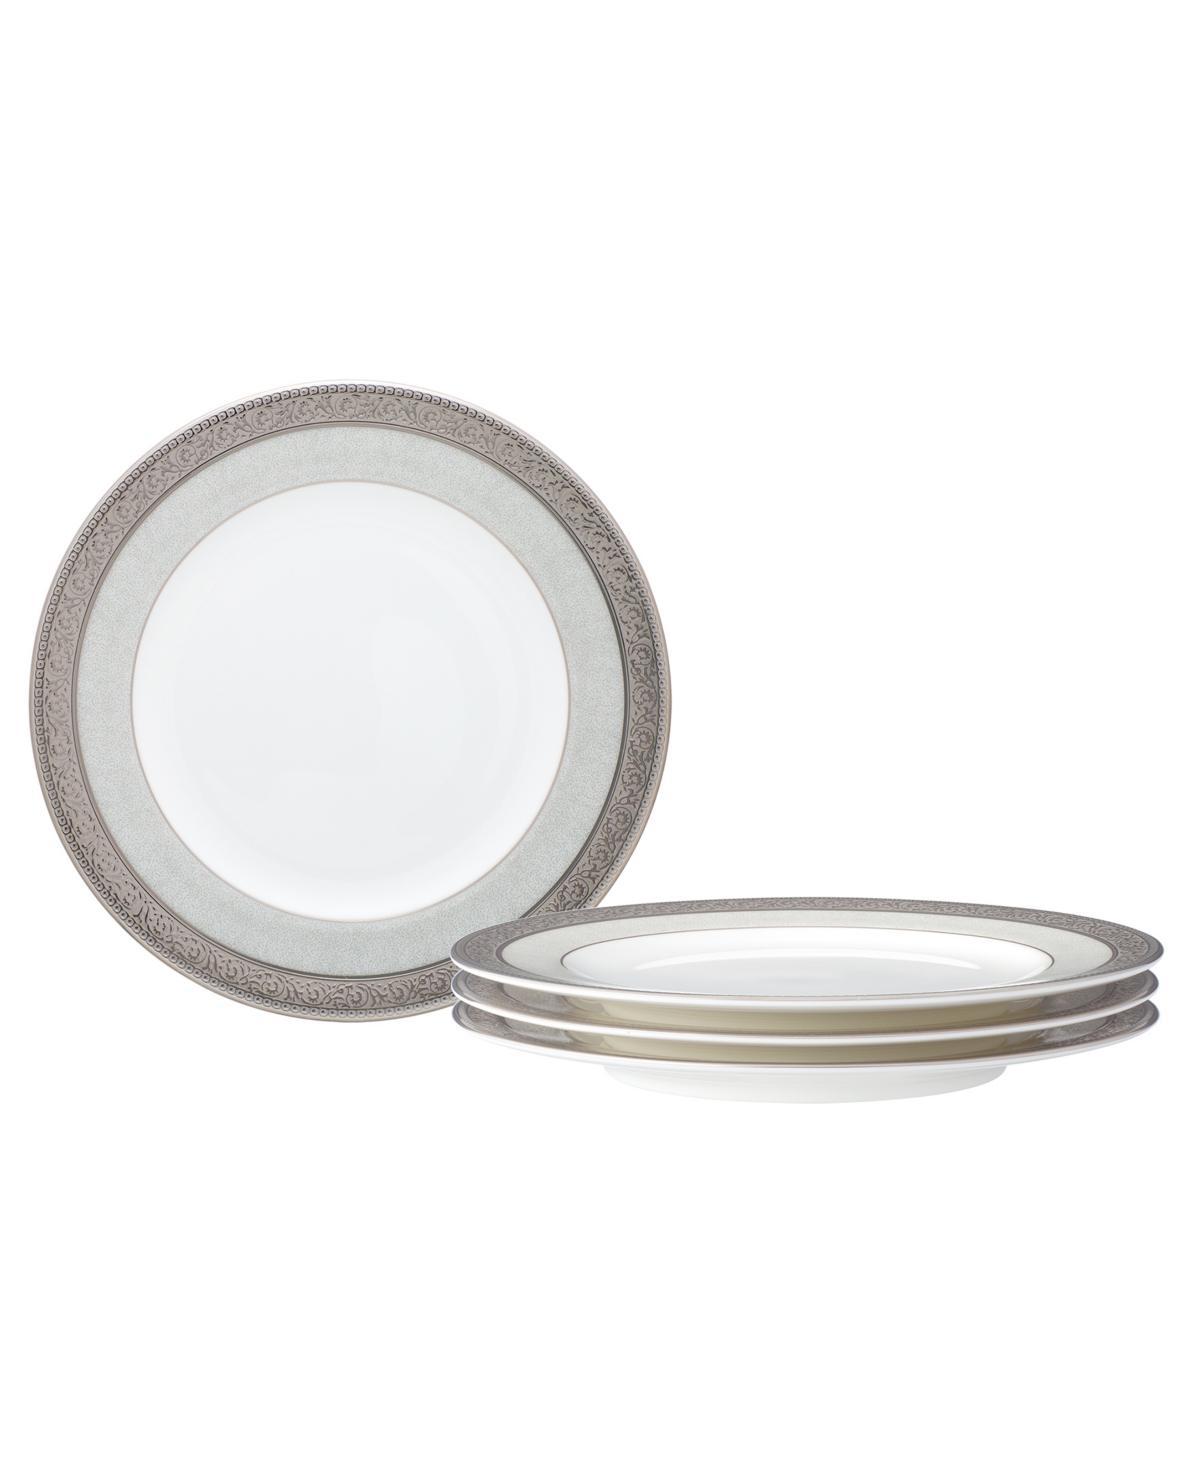 Noritake Summit Platinum Set Of 4 Bread Butter And Appetizer Plates, Service For 4 In White